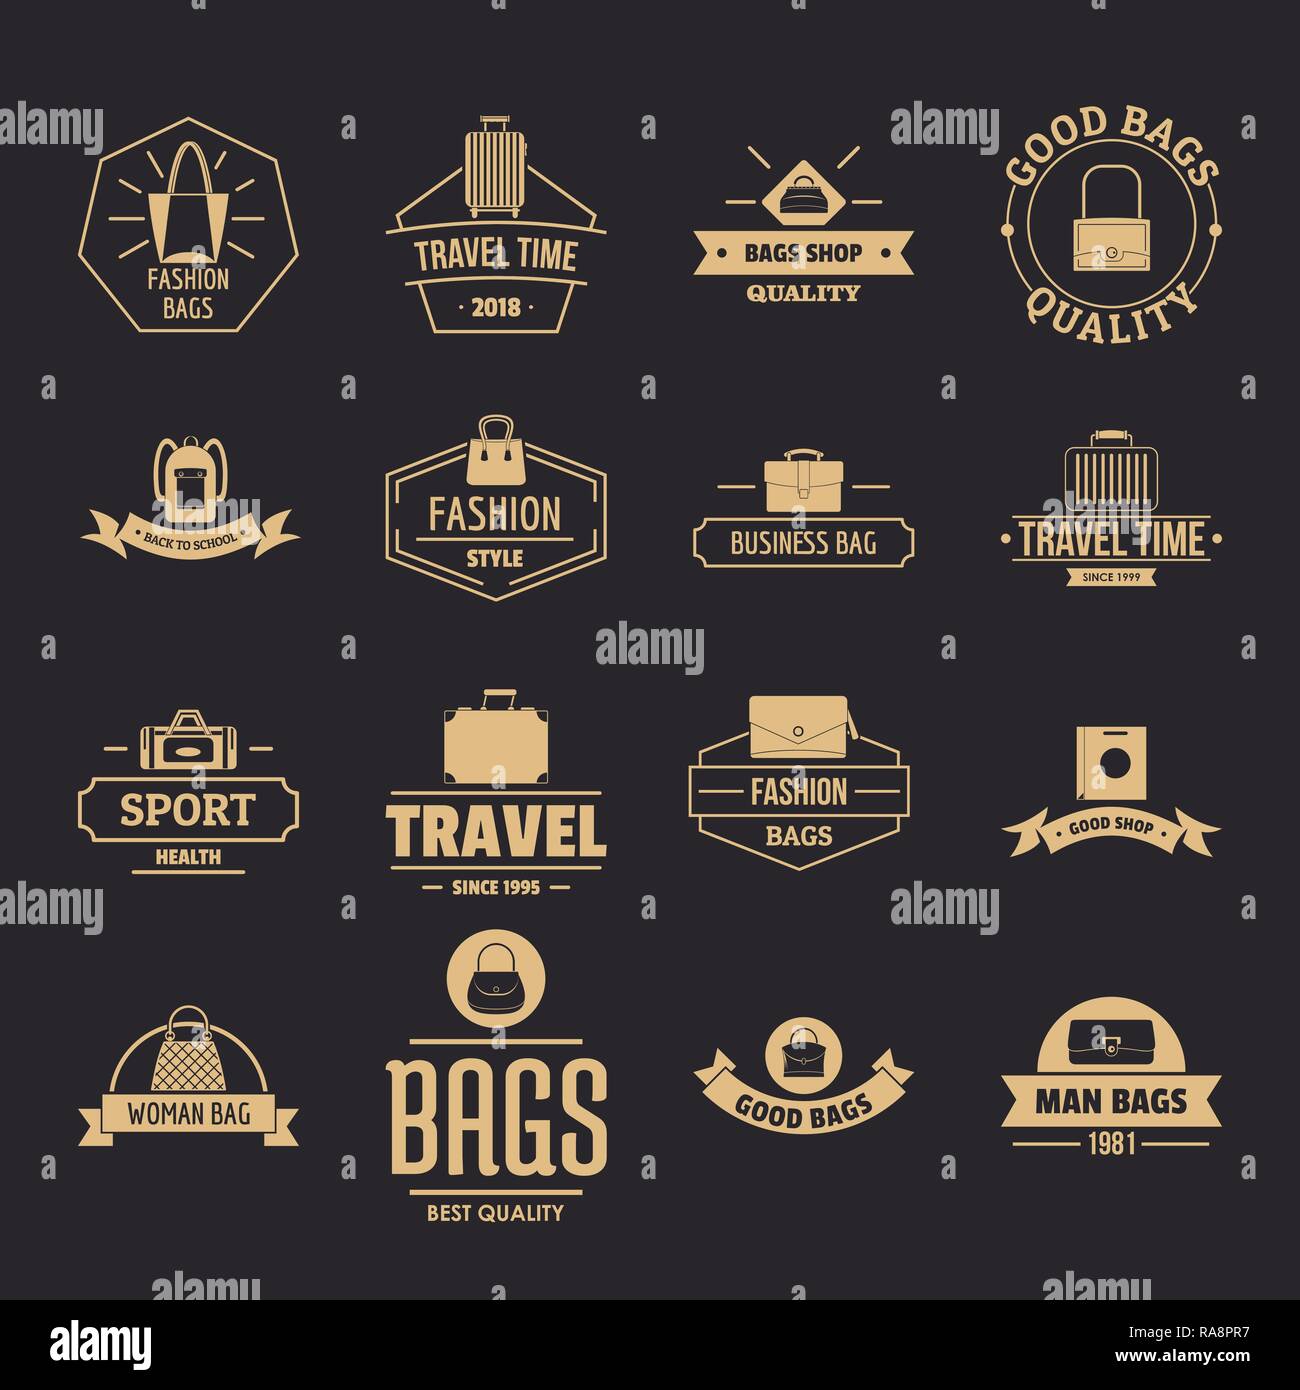 Travel baggage logo icons set, simple style Stock Vector